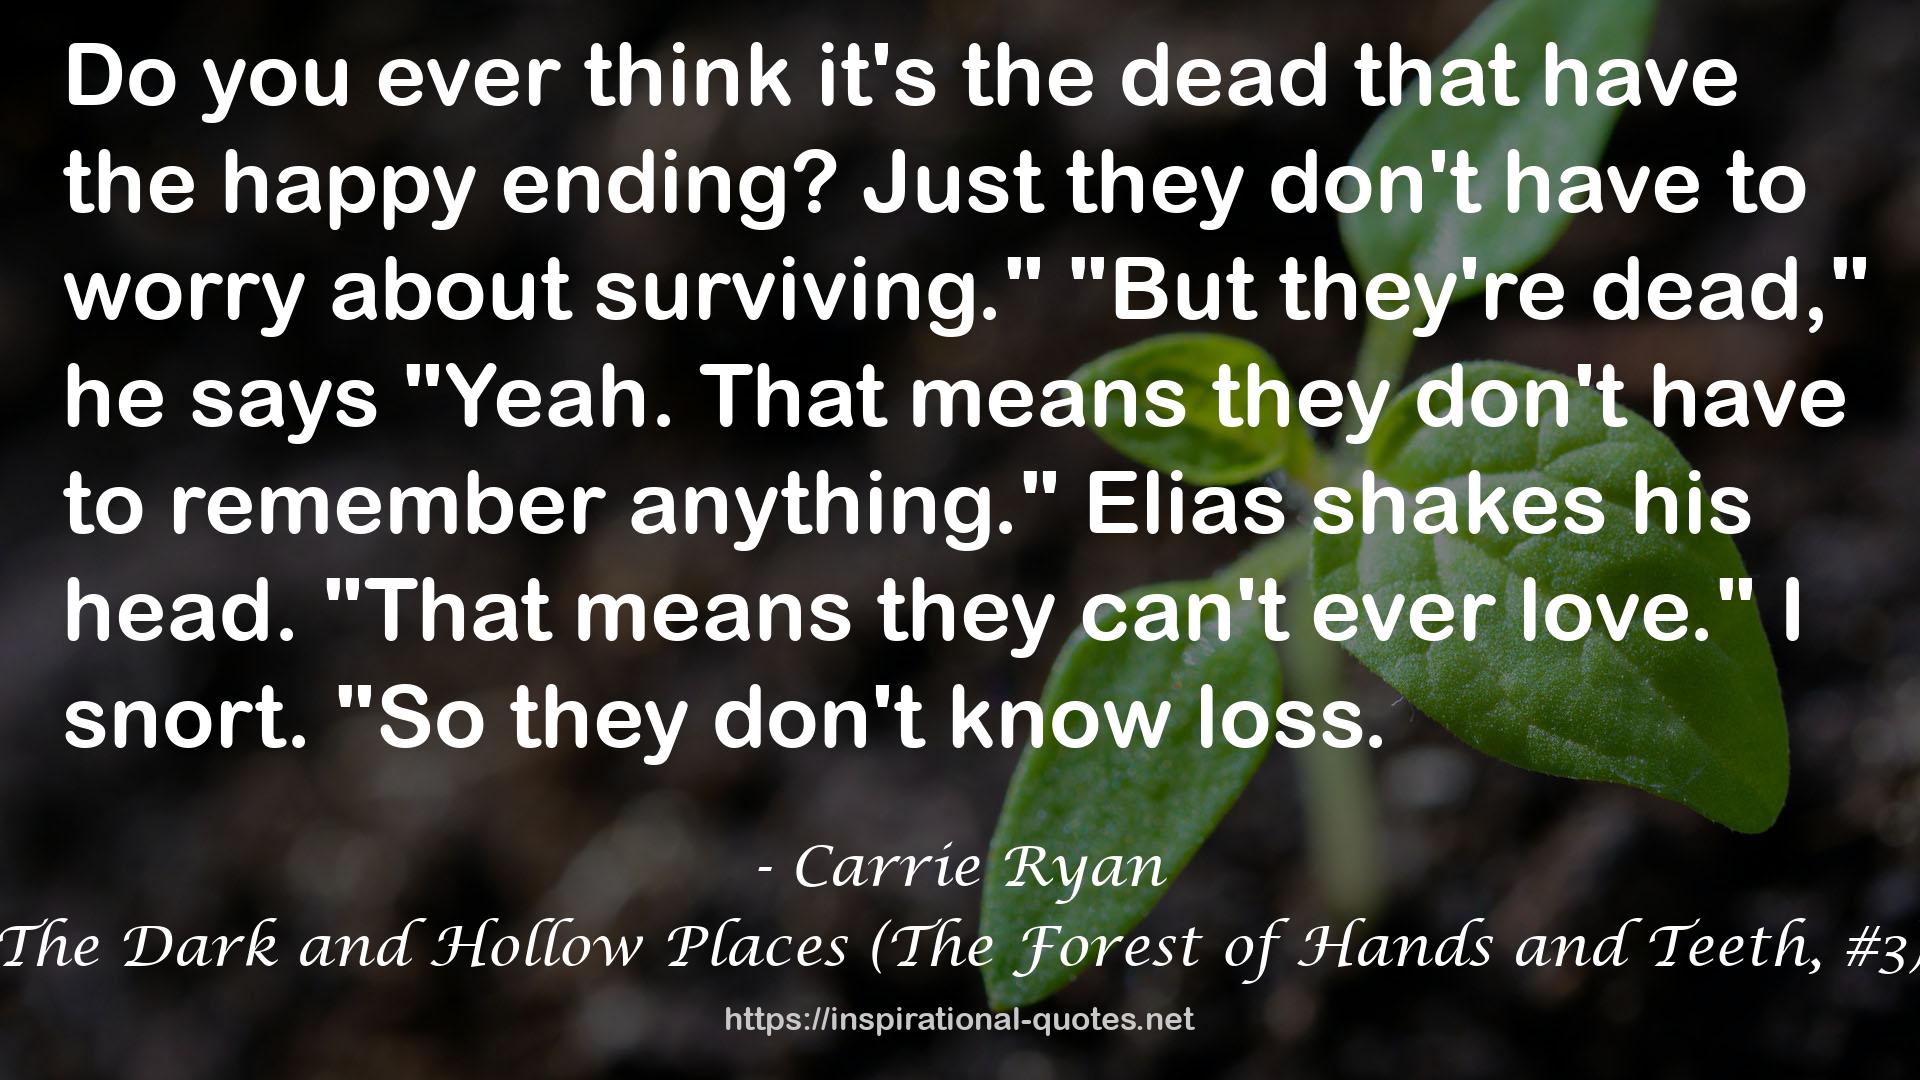 The Dark and Hollow Places (The Forest of Hands and Teeth, #3) QUOTES